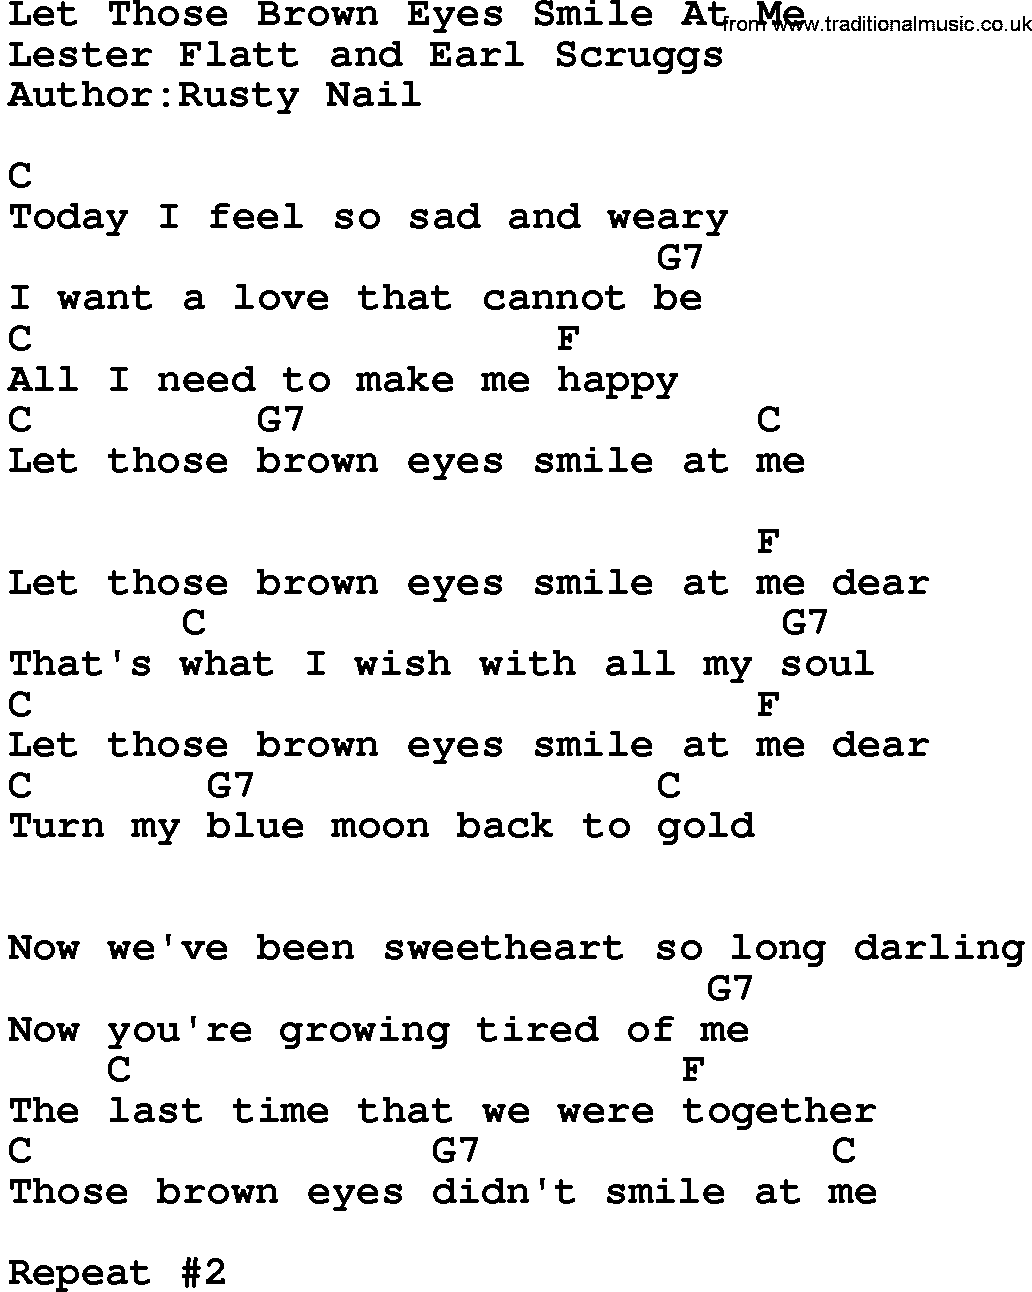 Country music song: Let Those Brown Eyes Smile At Me lyrics and chords